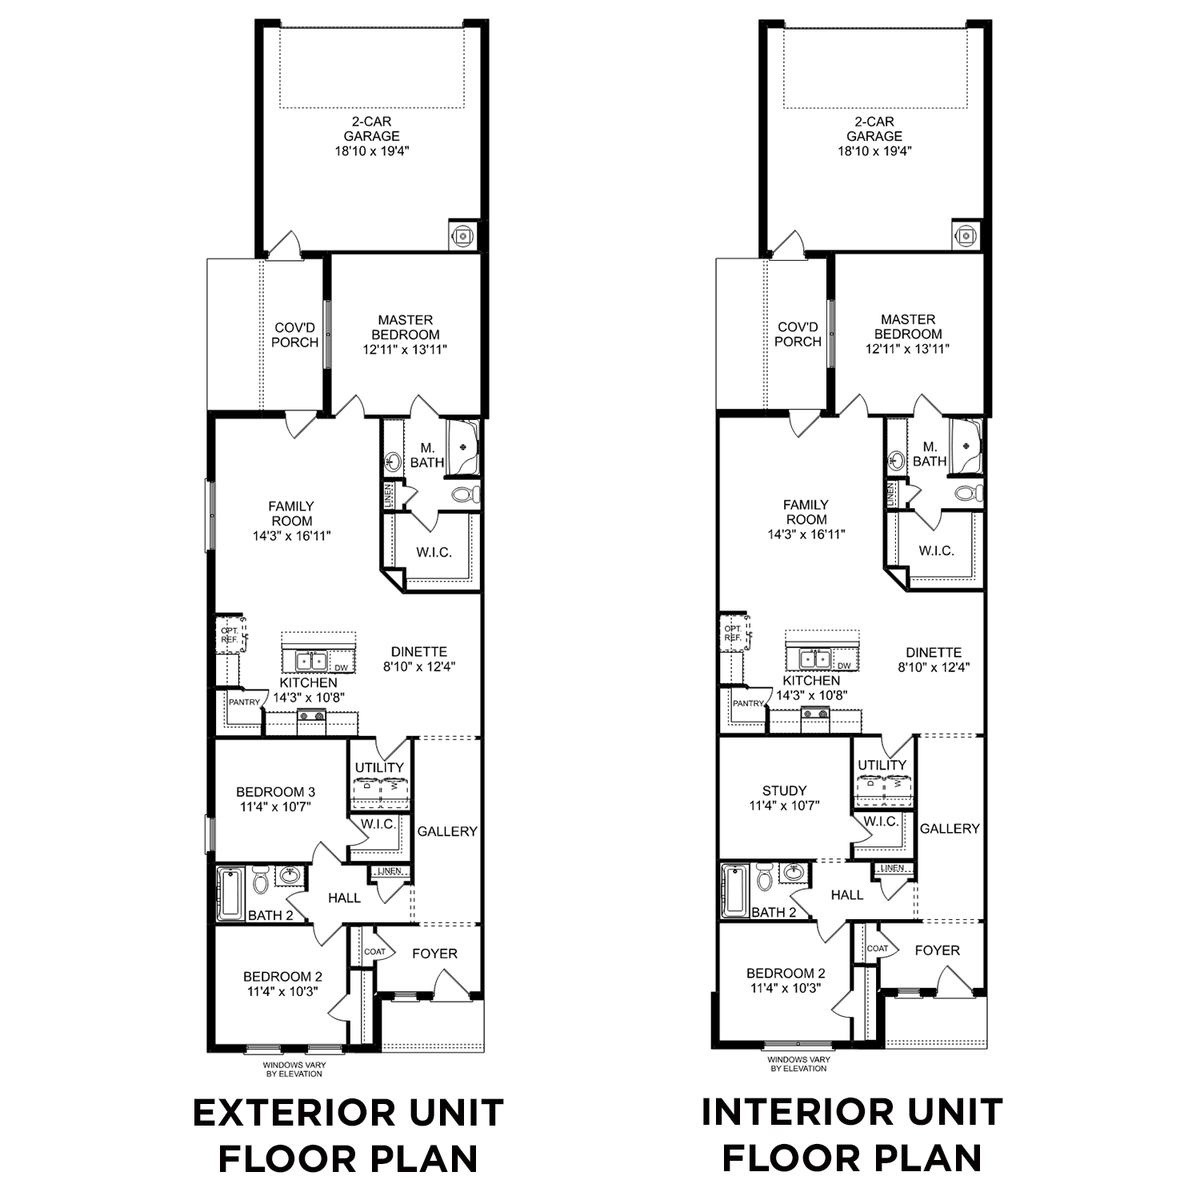 1 - The Camilla A floor plan layout for 421 Ronnie Drive in Davidson Homes' Cain Park community.